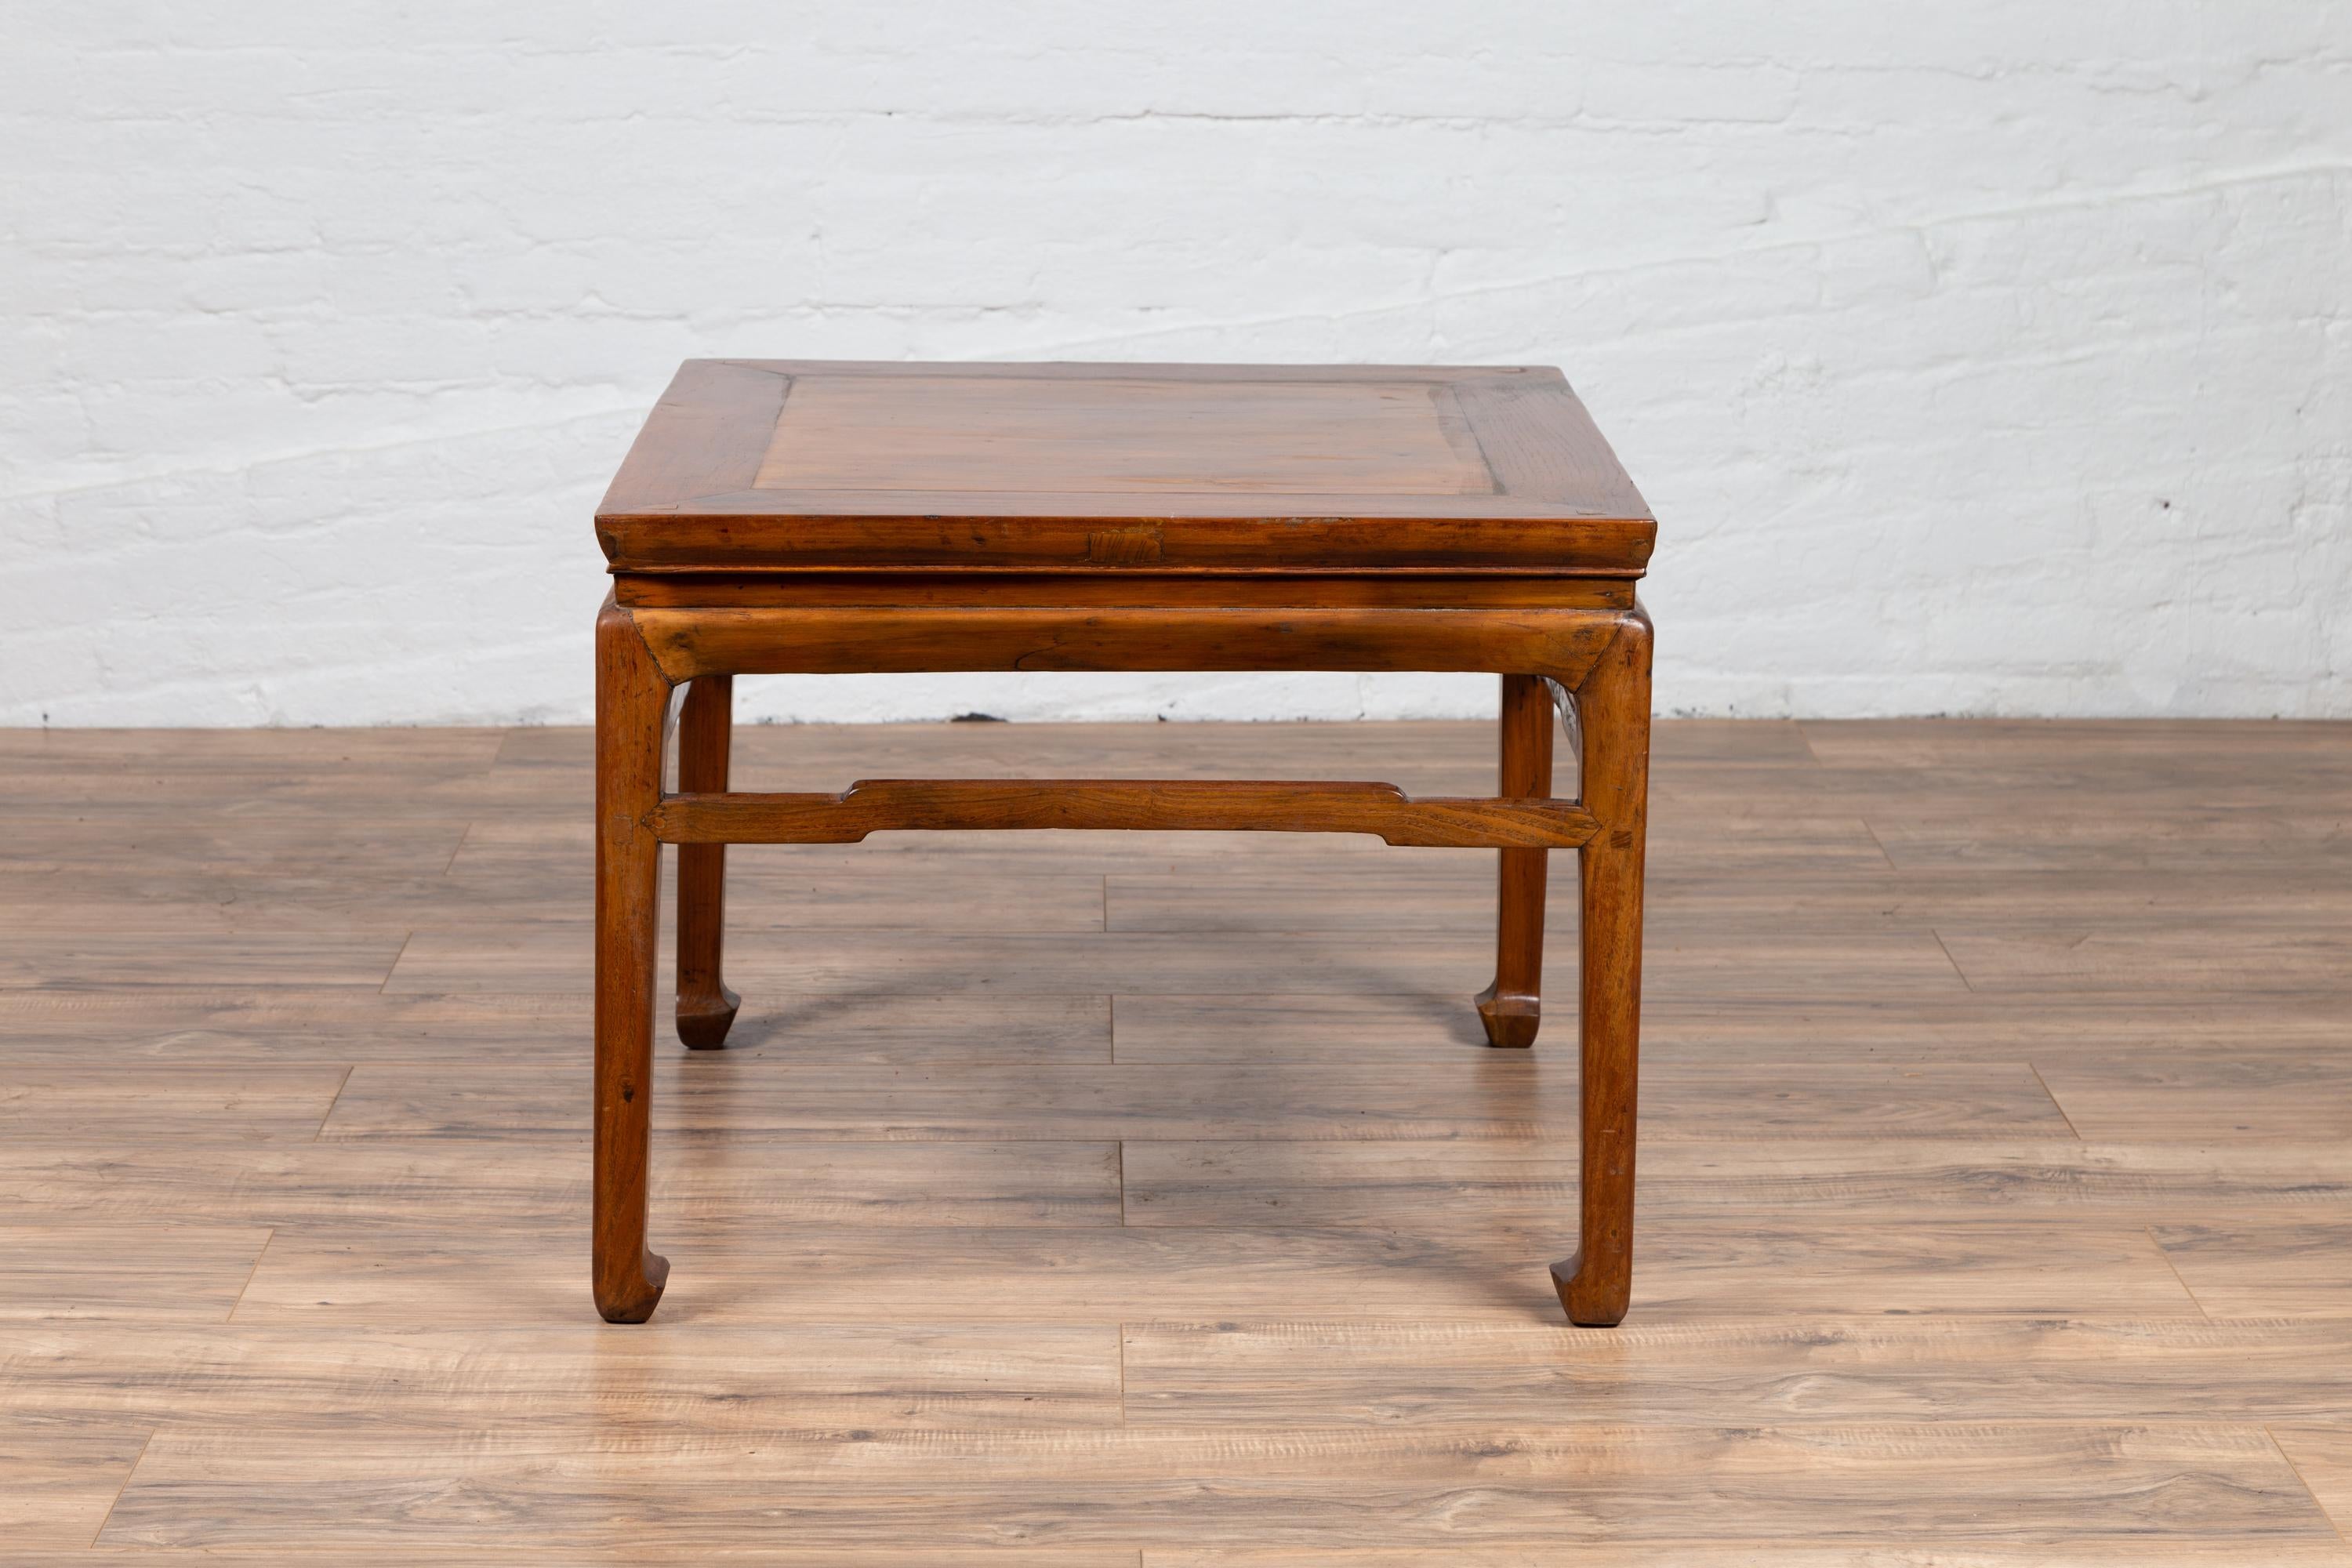 A Chinese antique Ming Dynasty style side table from the early 20th century, with horse hoofed feet and humpback side stretchers. Born in China during the early years of the 20th century, this elegant Ming Dynasty style side table features a square